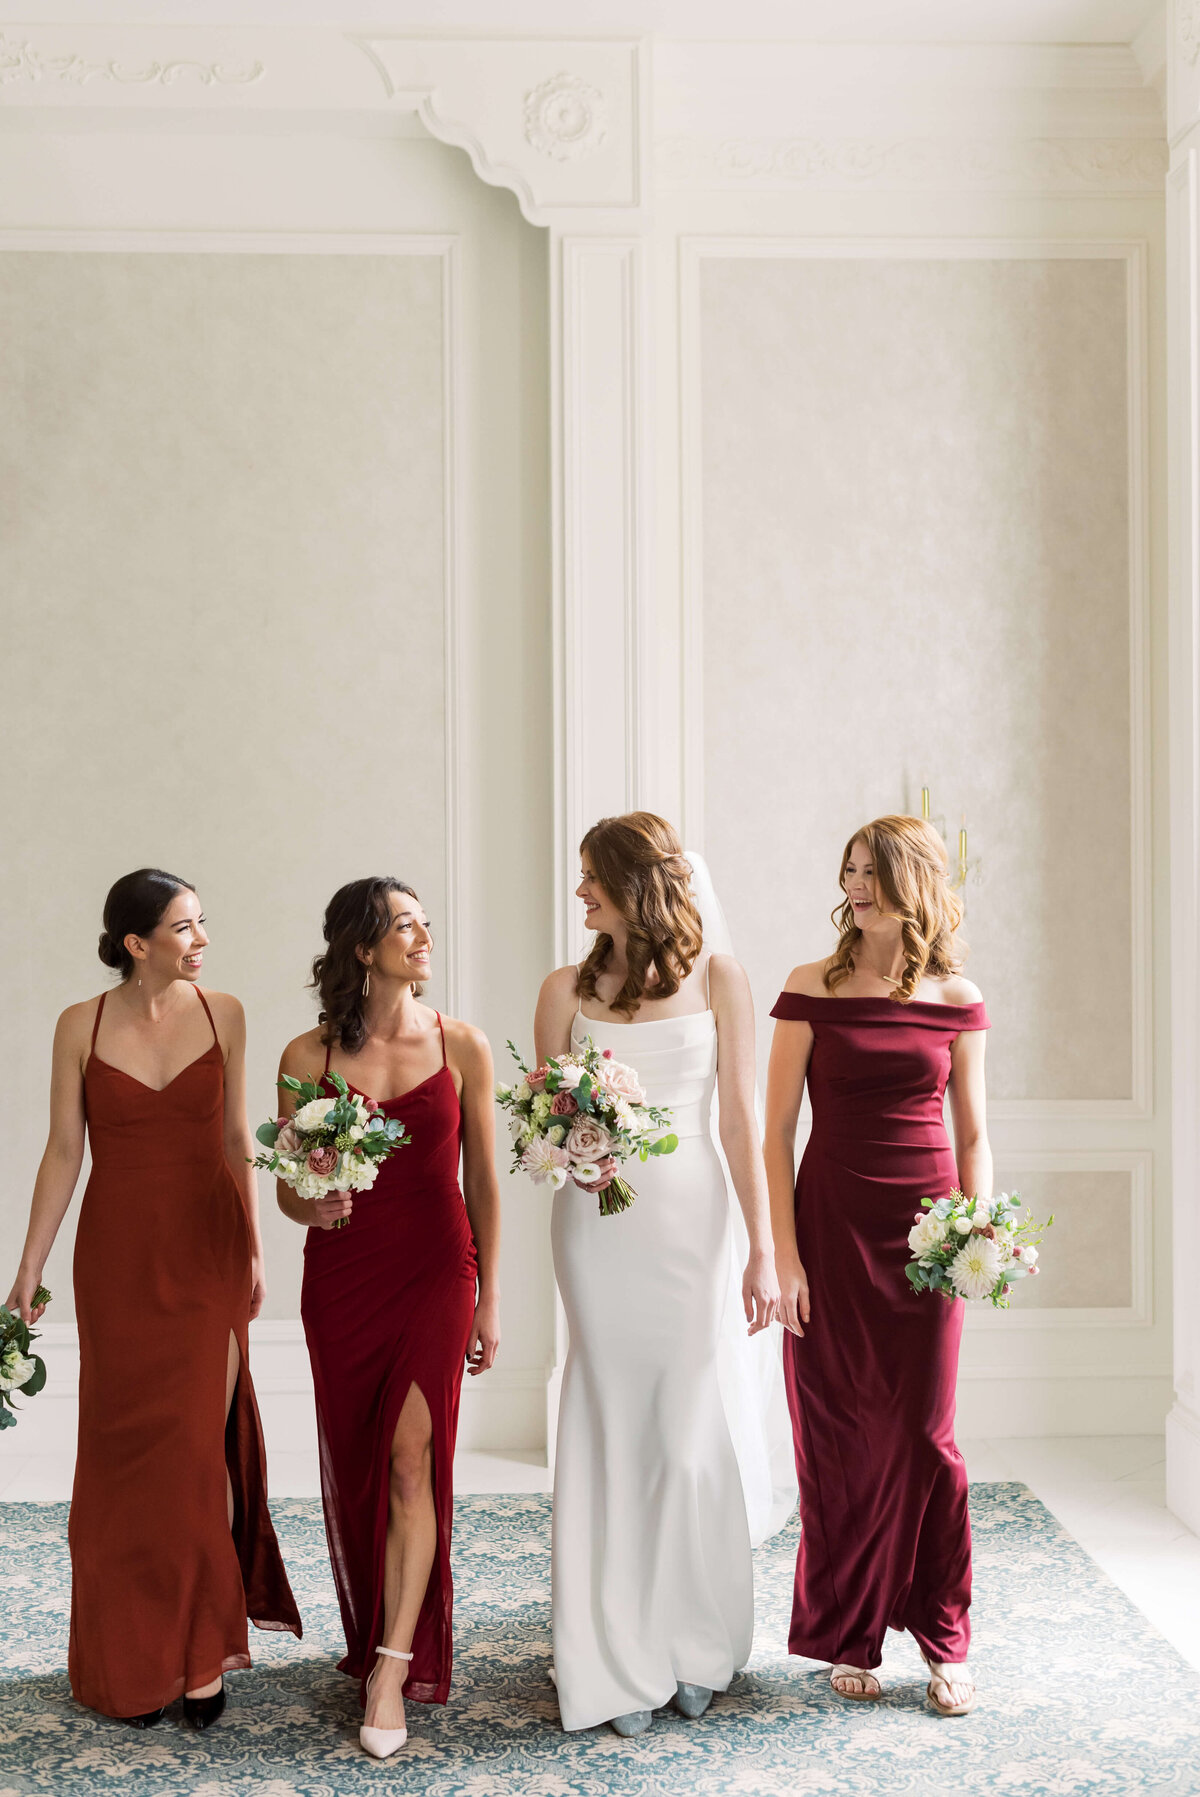 Bride with 3 bridesmaids wearing red dresses at Lord Nelson Hotel, Nova Scotia